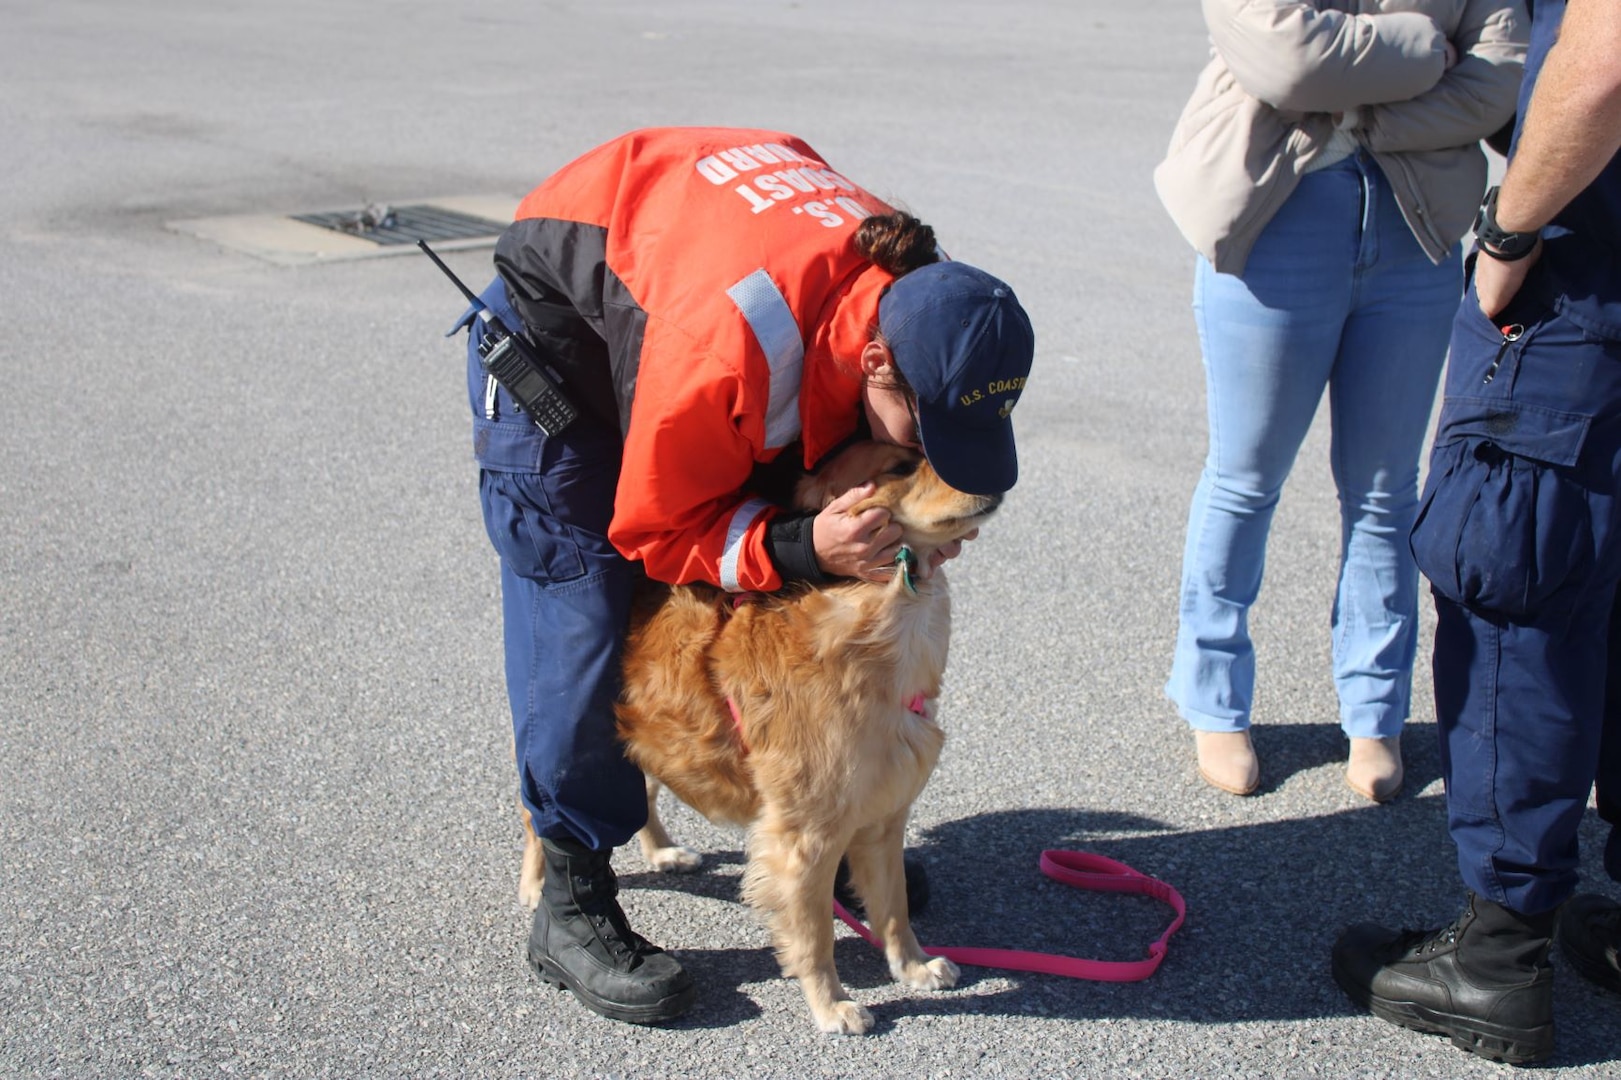 U.S. Coast Guard Petty Officer 1st Class Kalie Jones, a boatswain's mate assigned to the Coast Guard Cutter Dauntless (WMEC 624), greets her dog at the unit's return to homeport in Pensacola, Florida, Dec. 12, 2023. Dauntless deployed for 25 days in the Caribbean to conduct maritime safety and security operations.